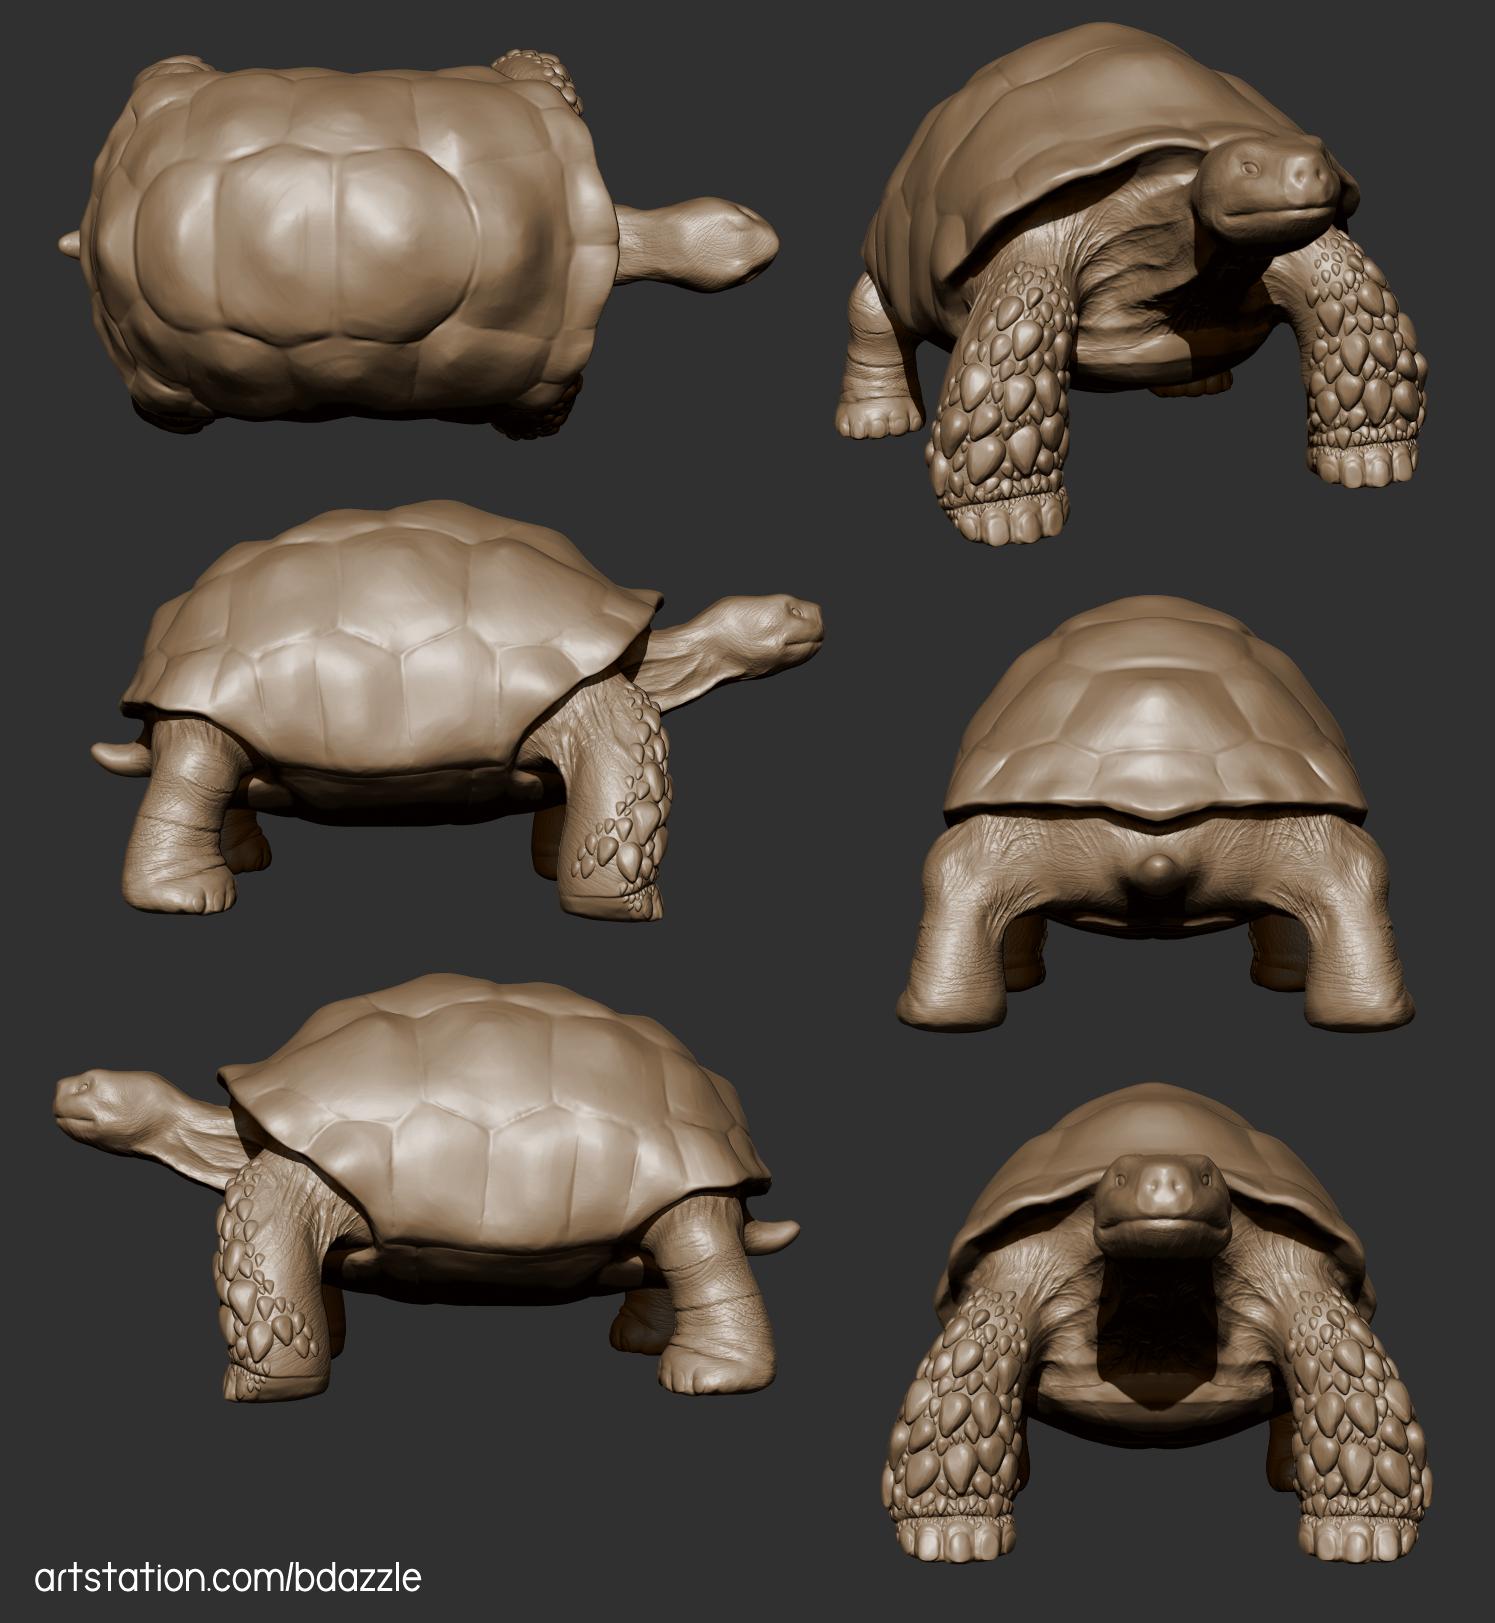 3D sculpted tortoise from multiple points of view by Britney Luong